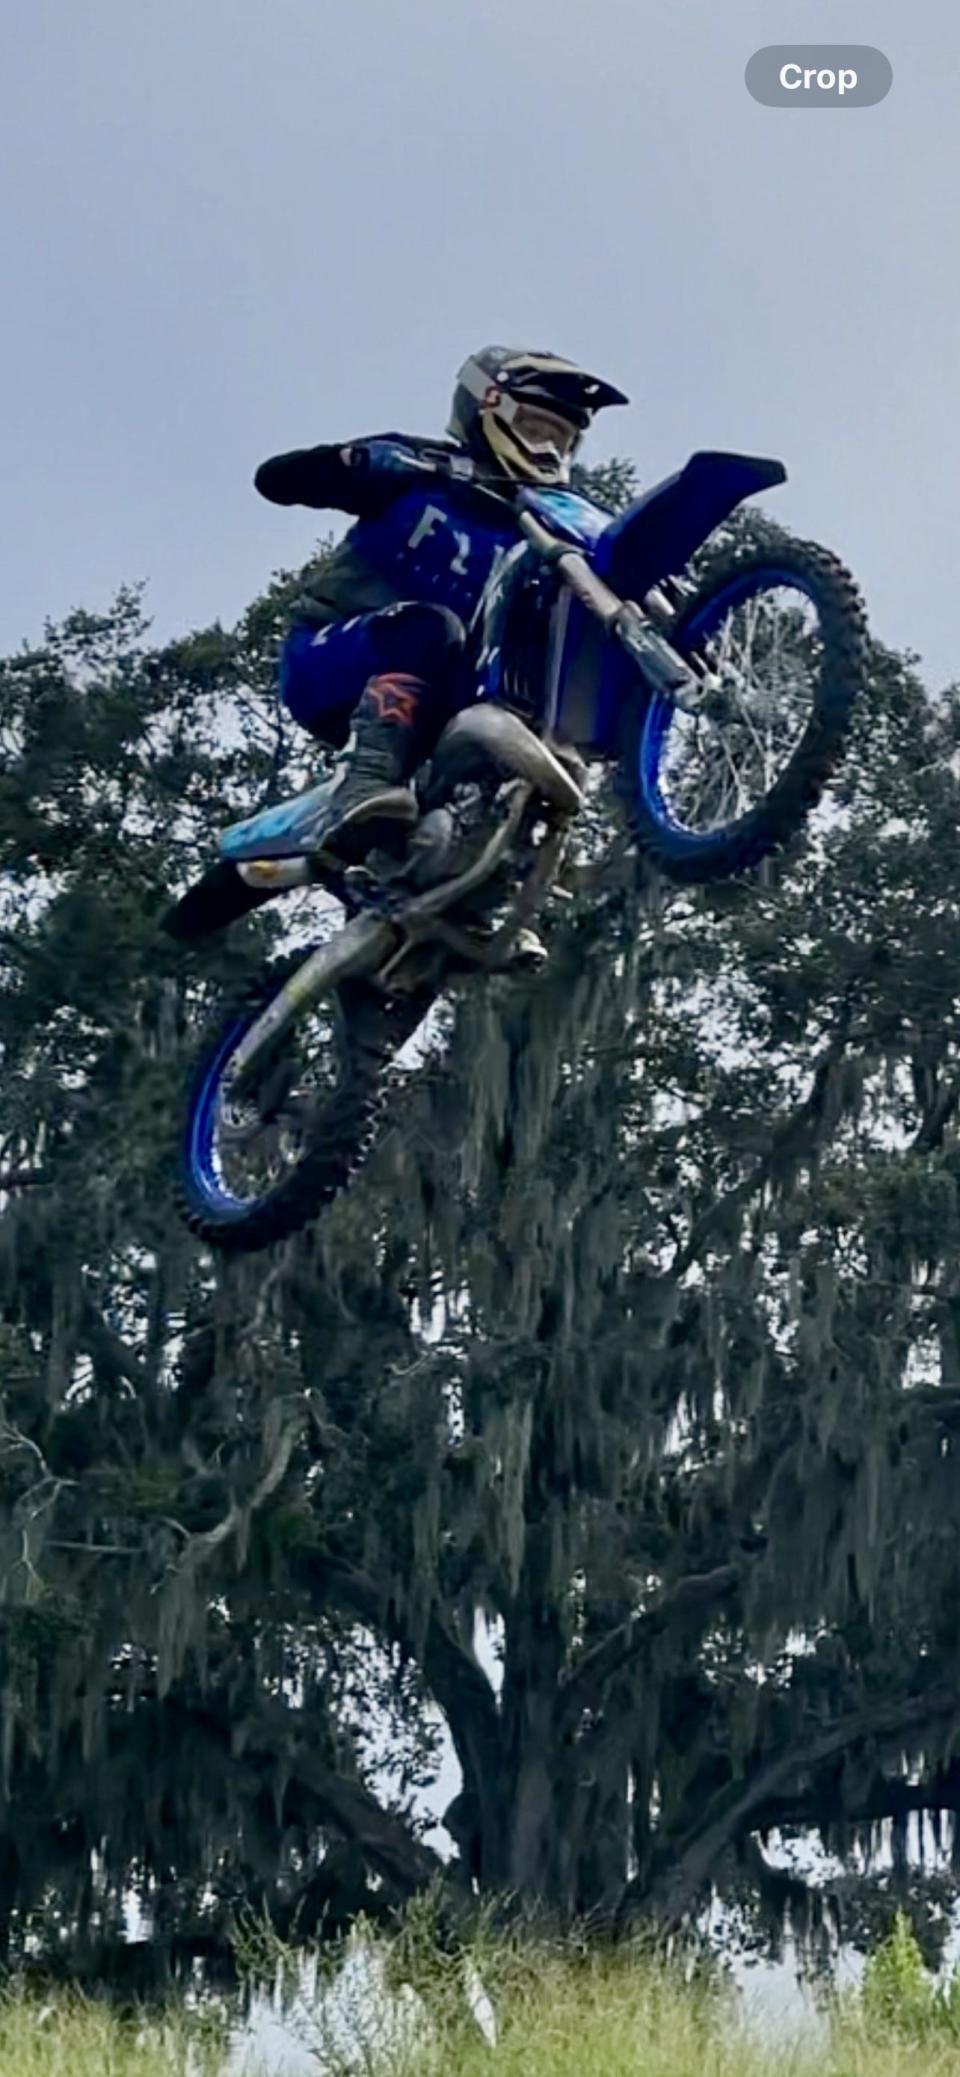 Paxton Zivitski, 13, of Ormond Beach, makes a 50-foot leap at a private motocross track on Sept. 12. Paxton was one of 7 boys from Volusia and Putnam counties training to ride dirt bikes and getting ready for competitions.